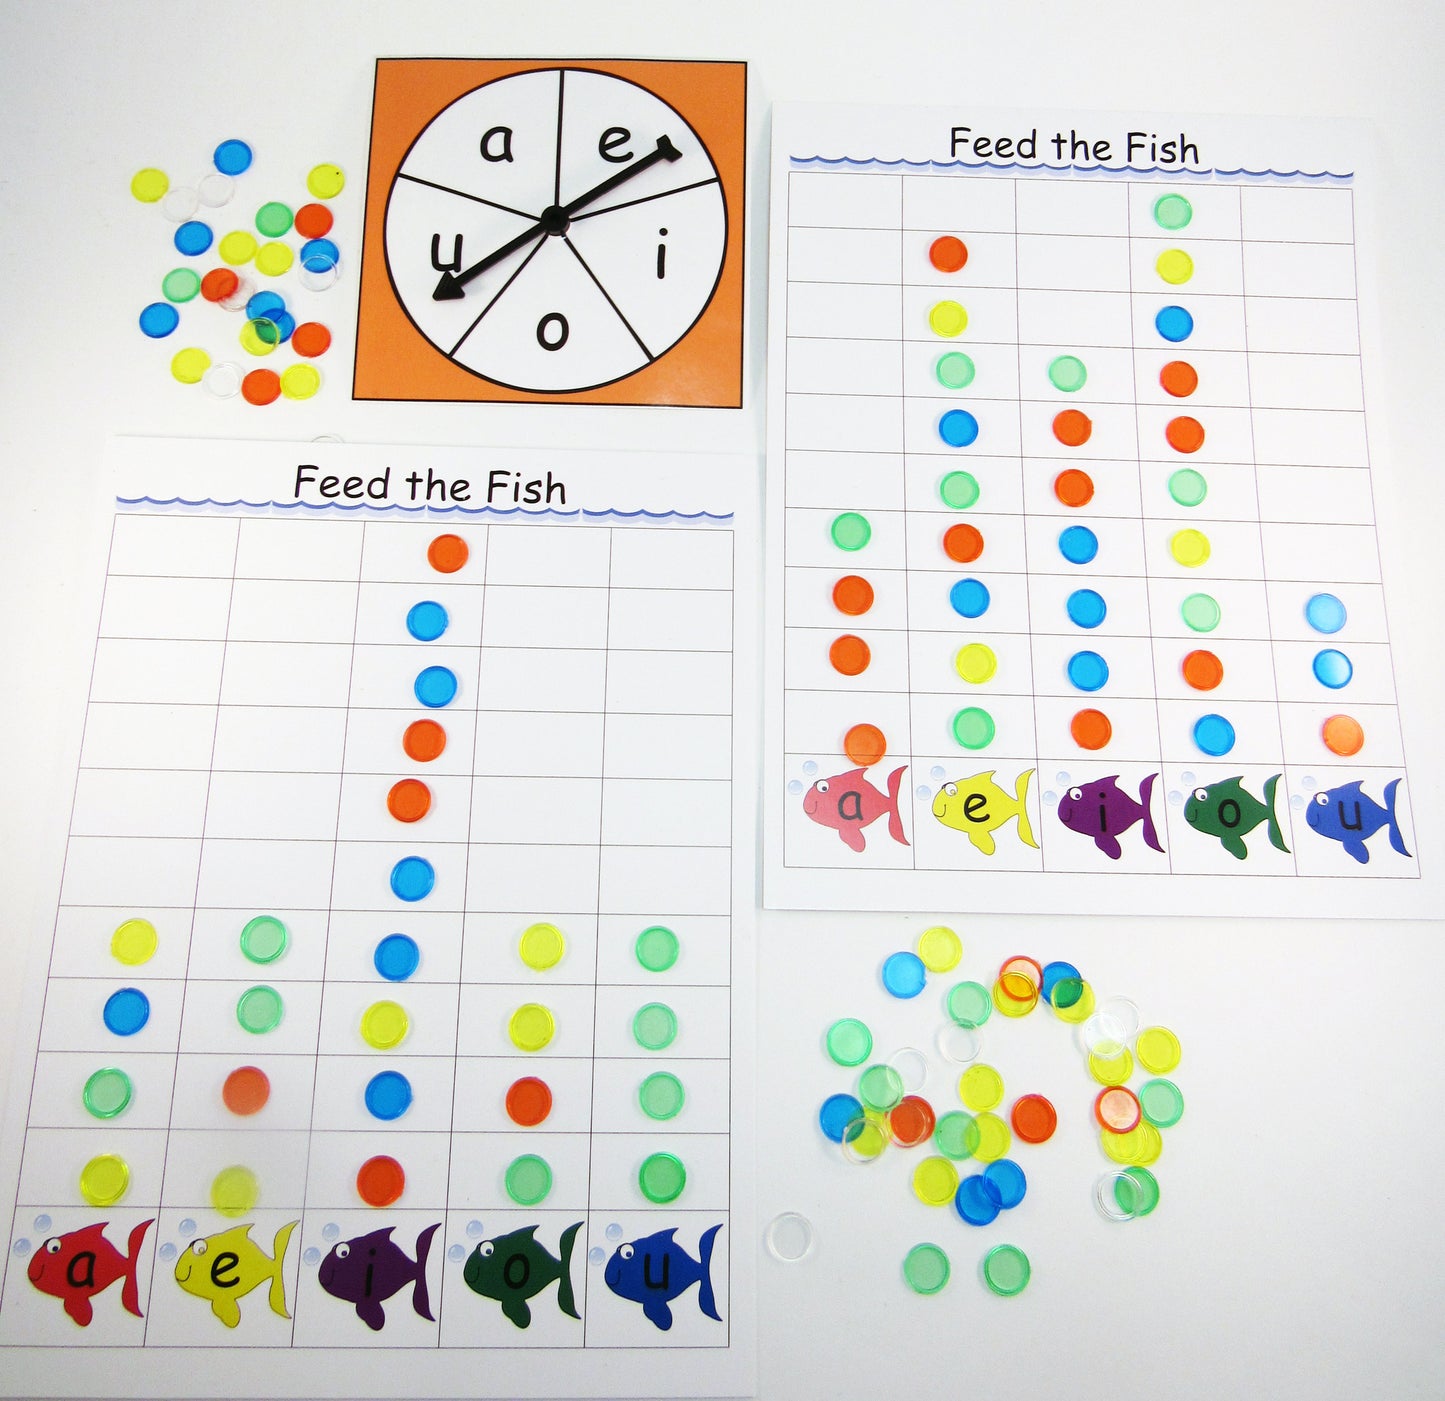 Feed the Fish - Vowel Race: Literacy activity inspired by by A Fish Out of Water by Helen Palmer